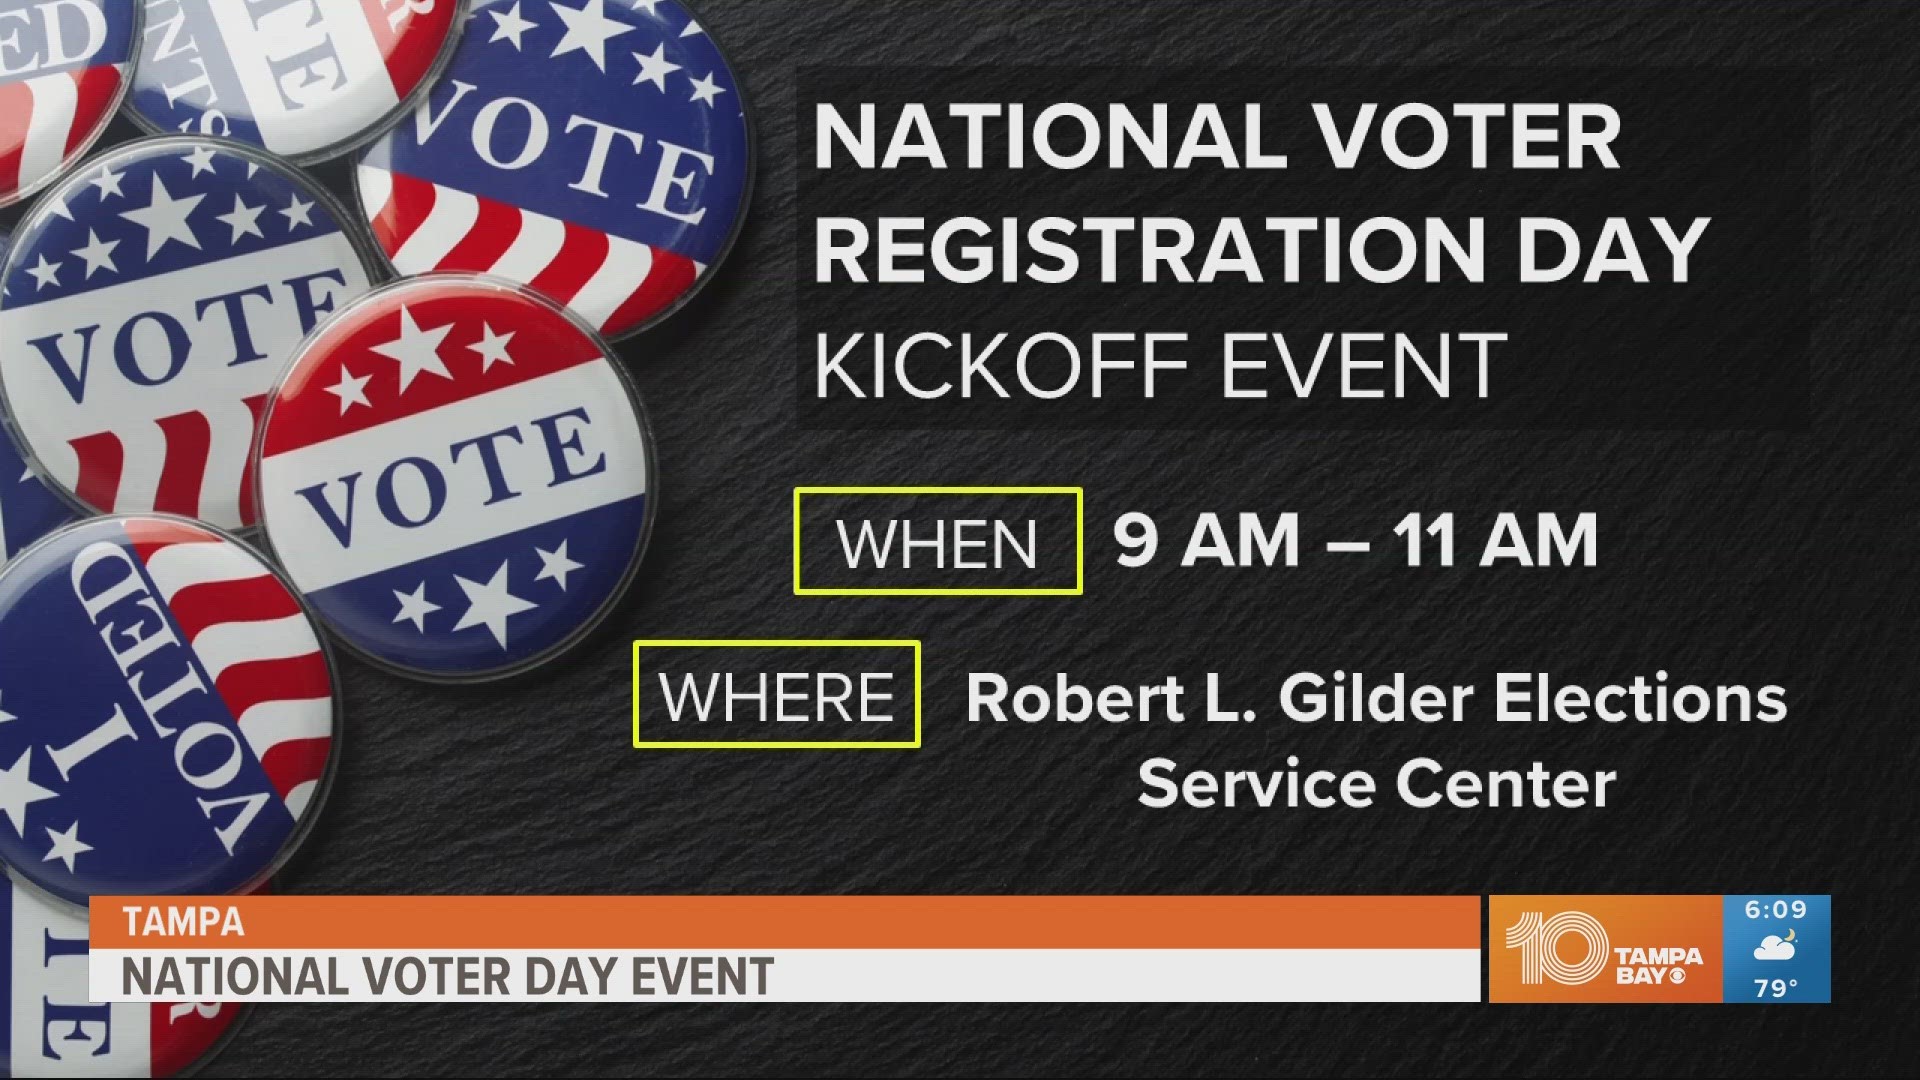 National Voter Day offers vital opportunities for voters to register and fill out ballot requests. Here are some places to do that around the area.